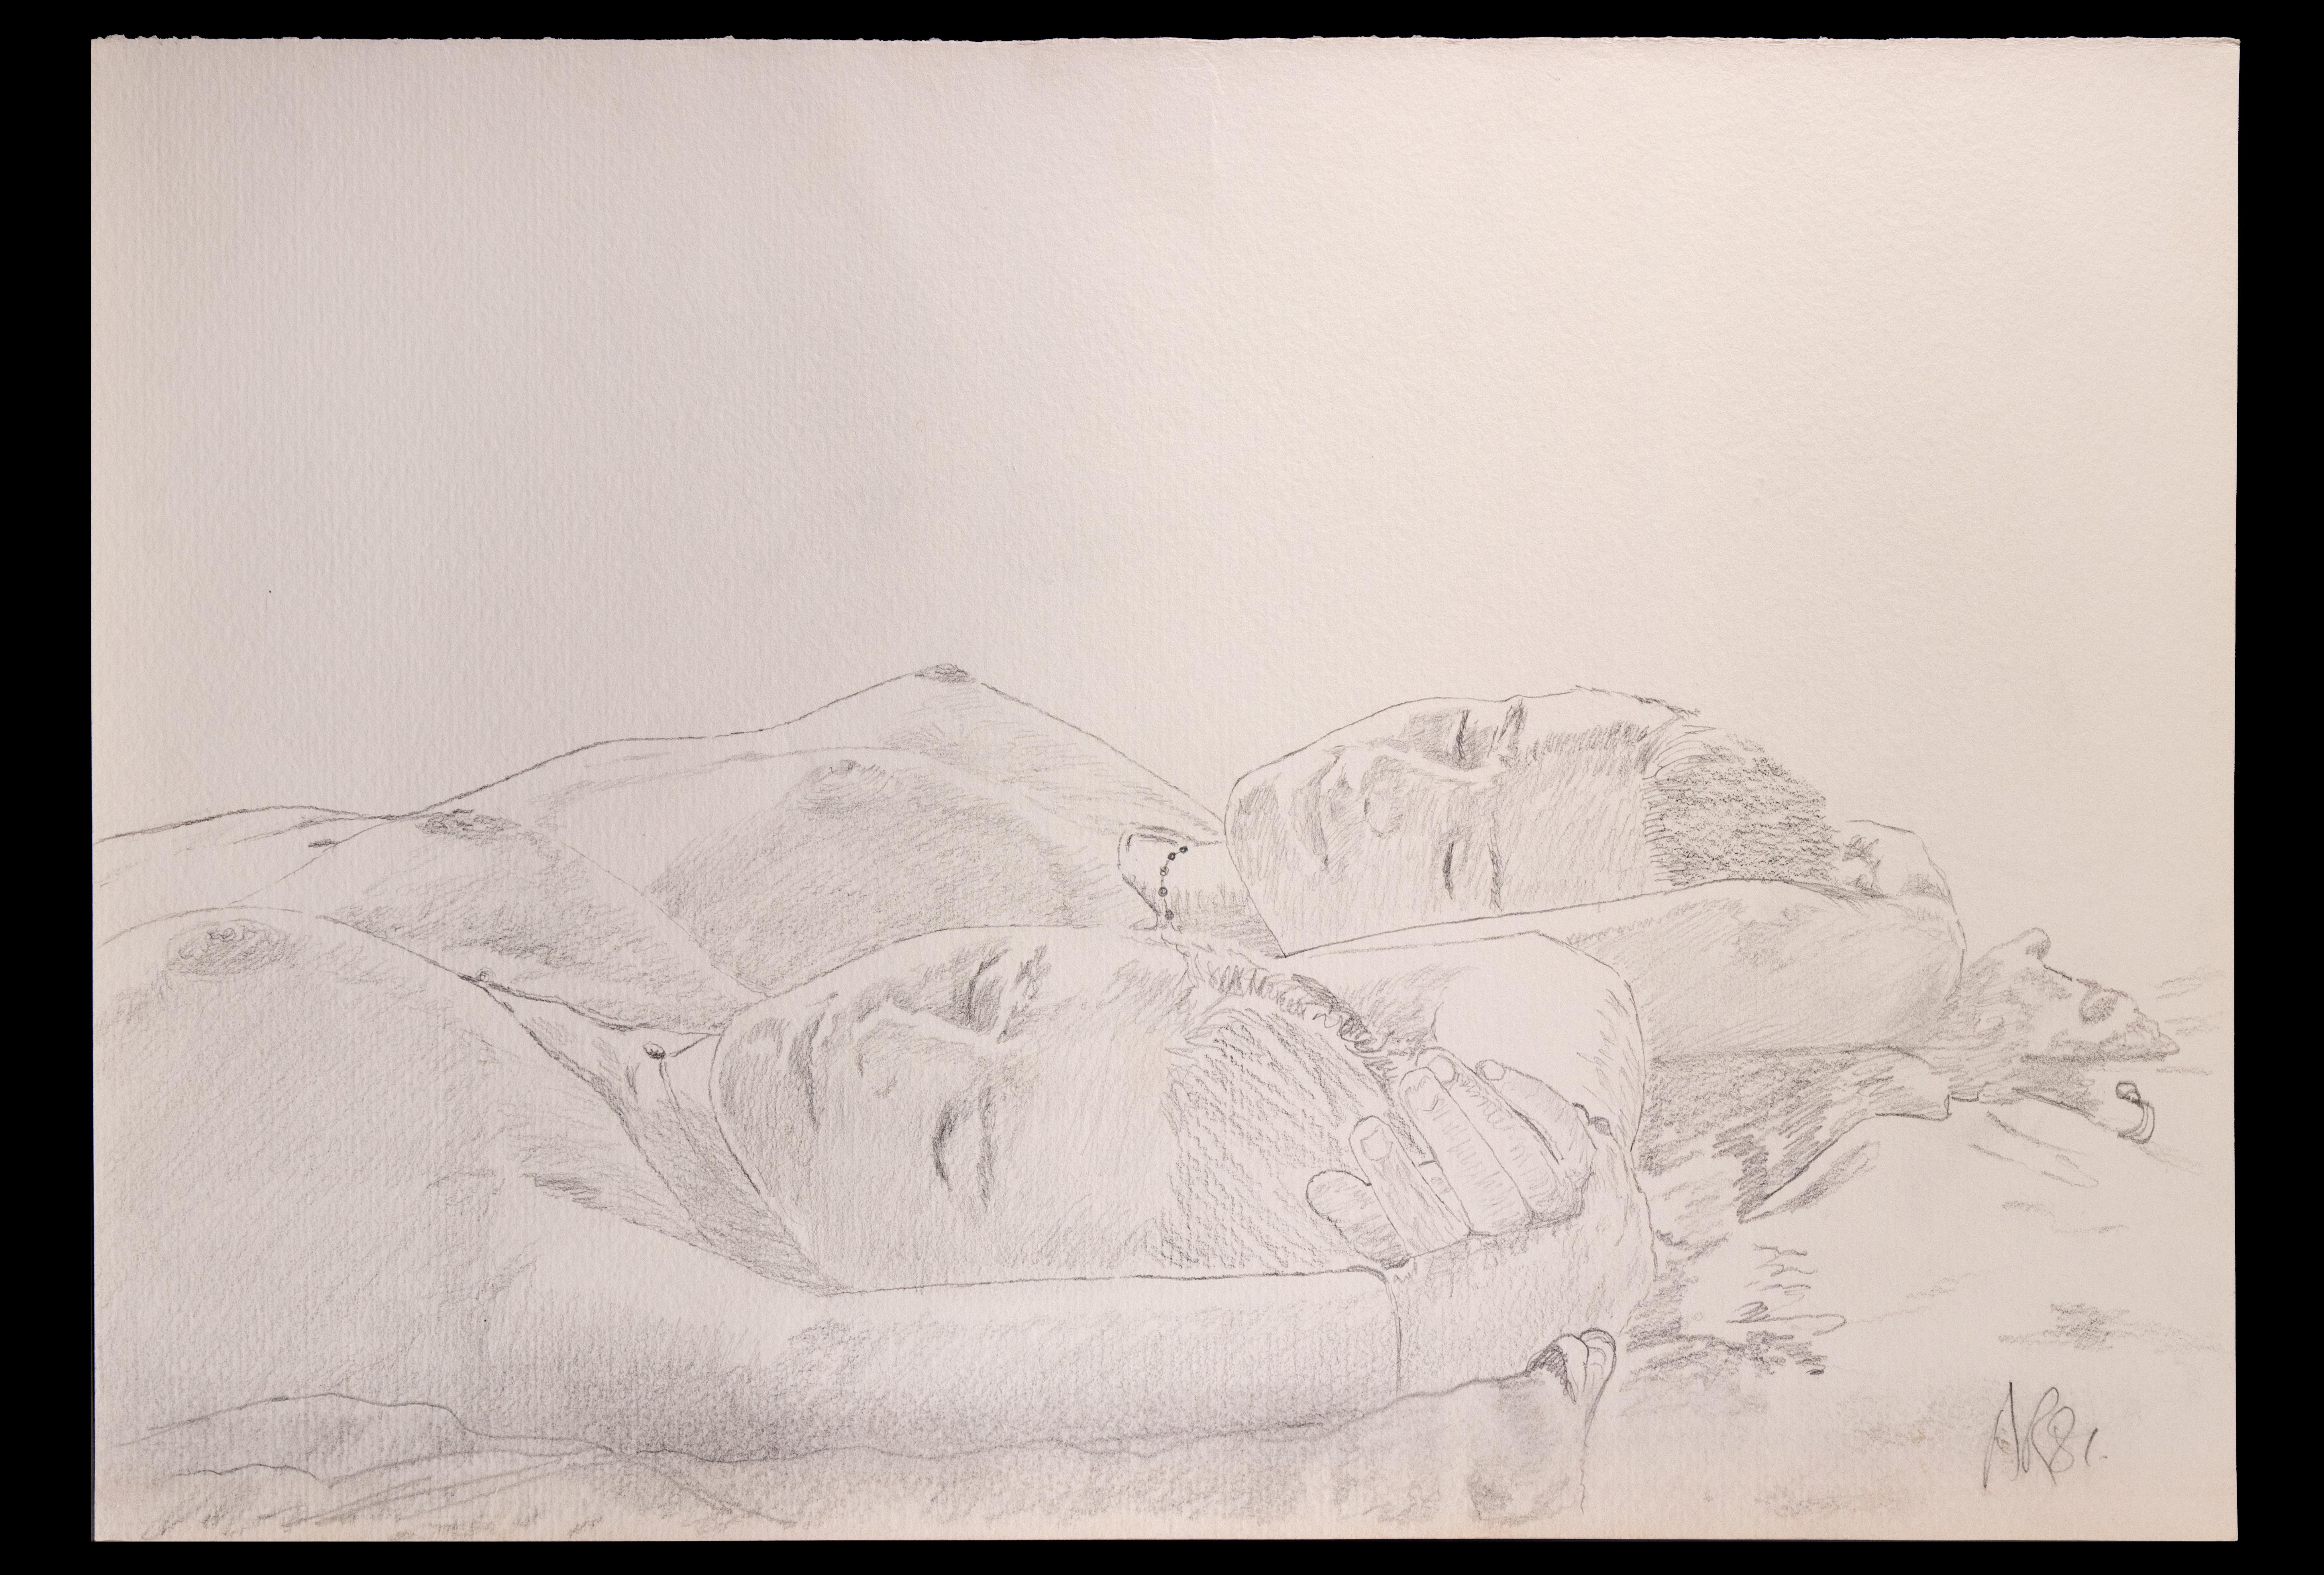 Sisters - Original Drawing by Anthony Roaland - 1981